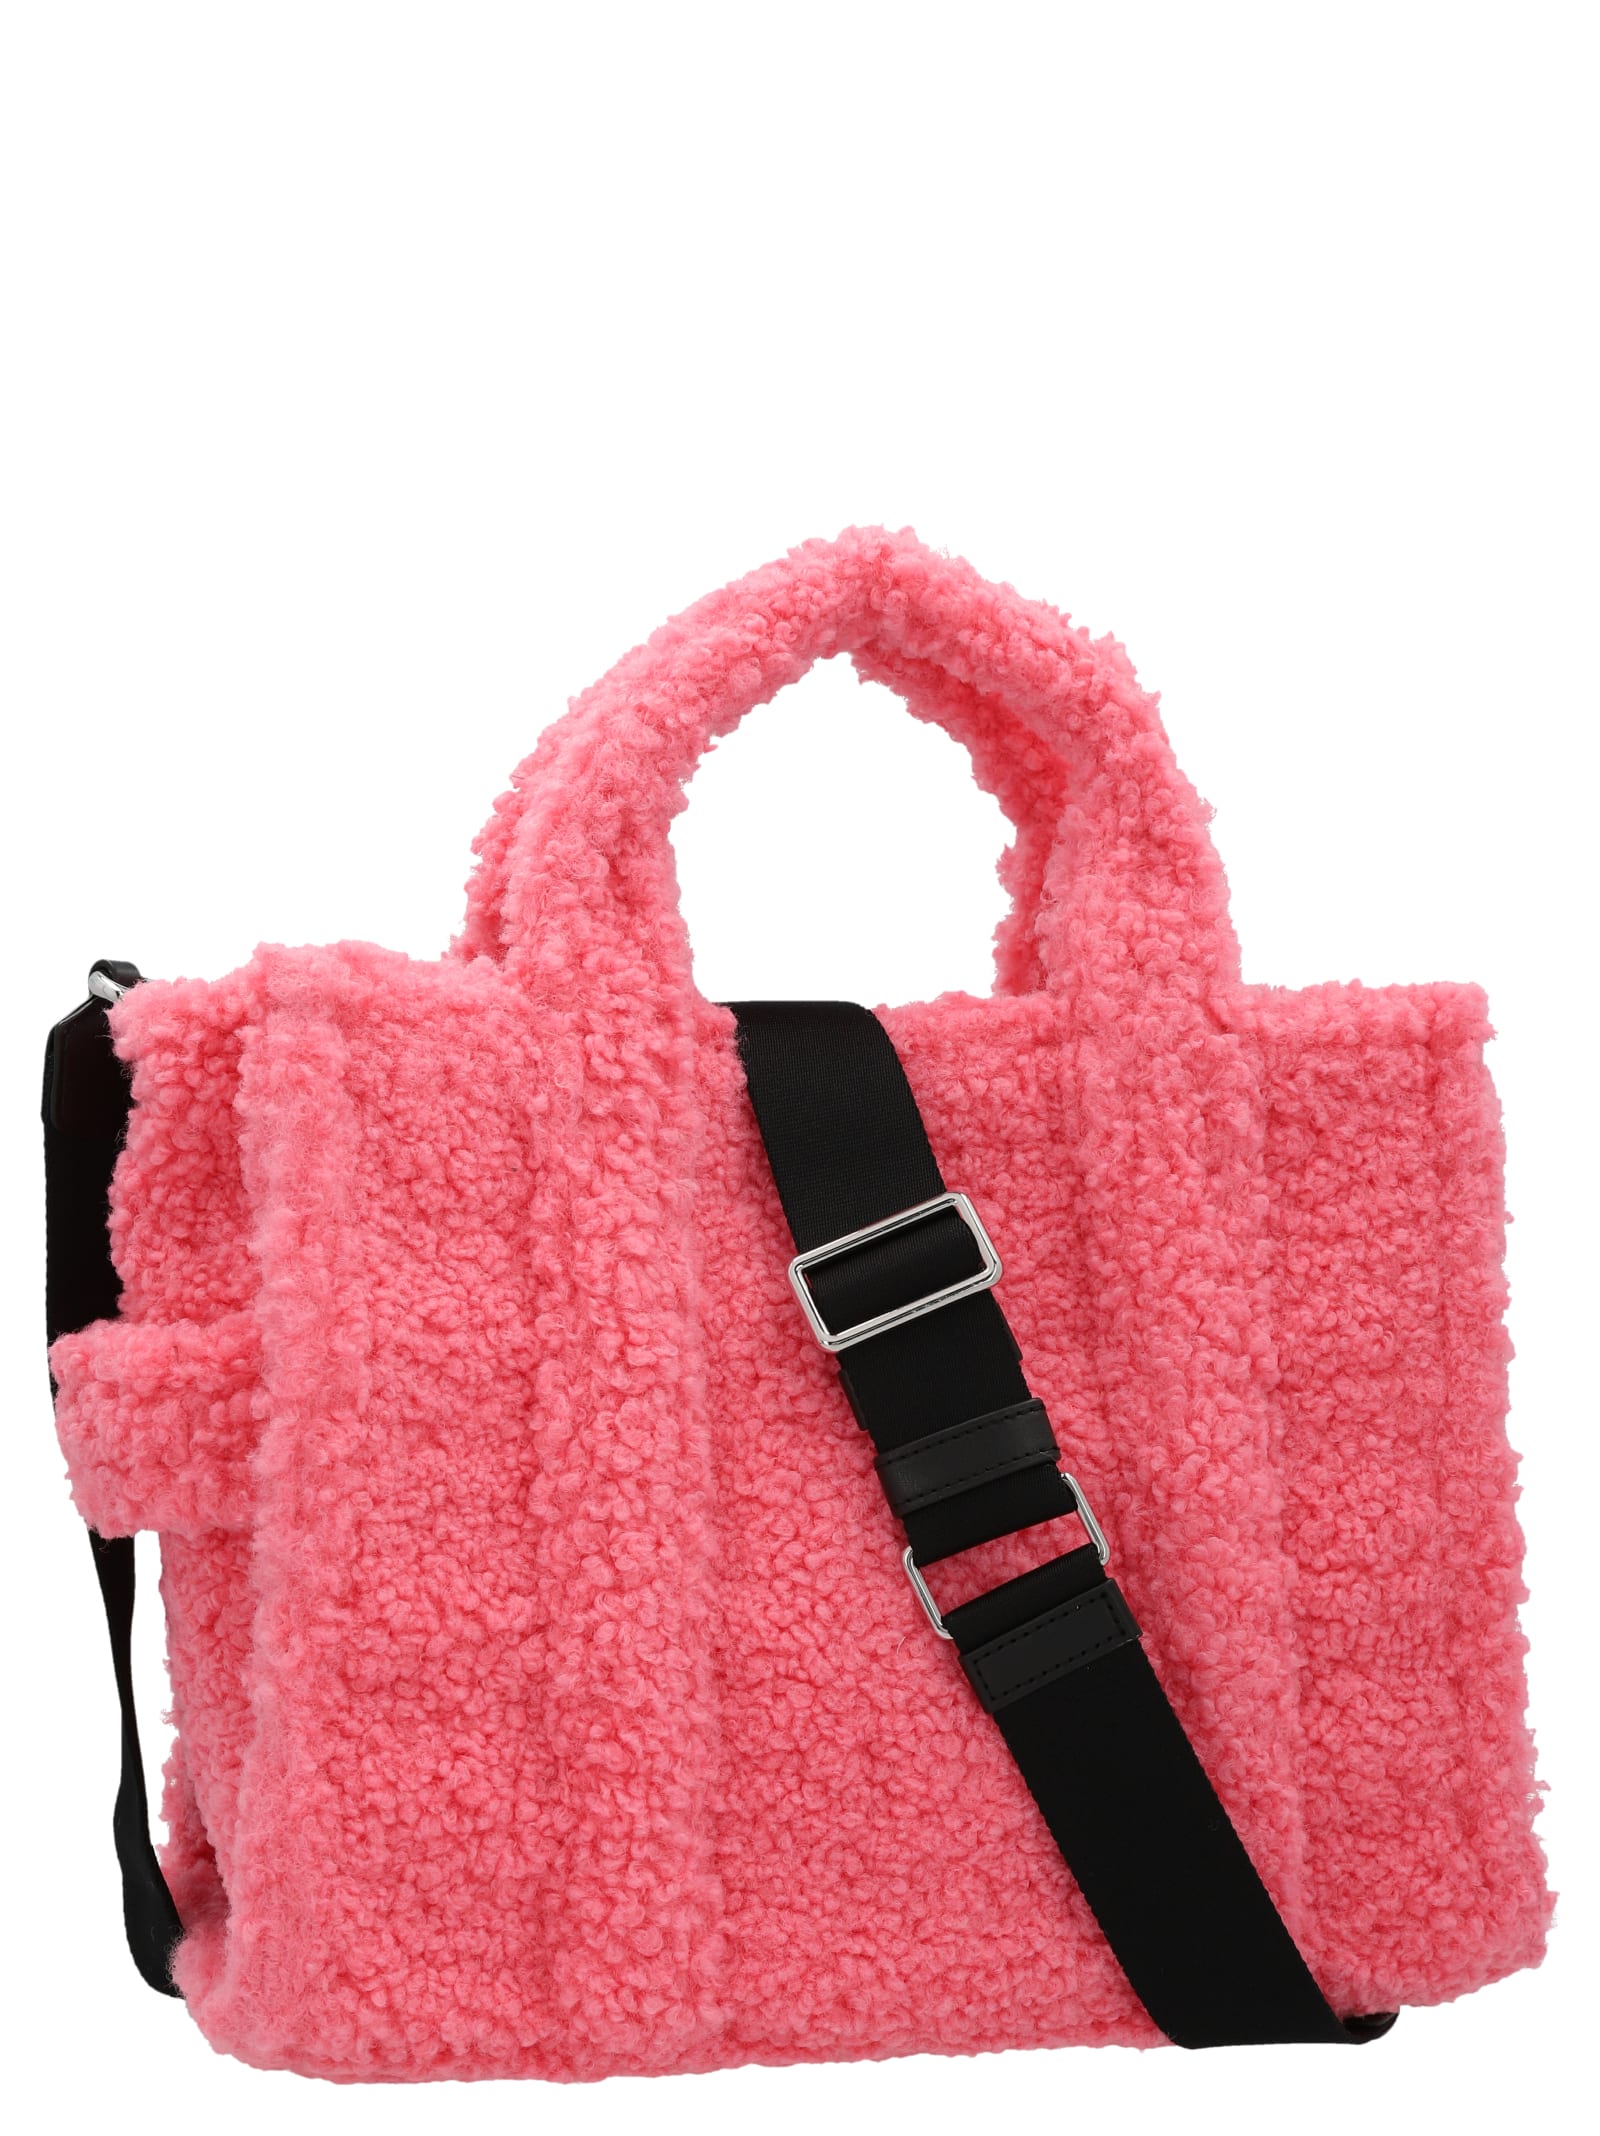 Marc Jacobs The Traveler Teddy Tote Bag in Pink